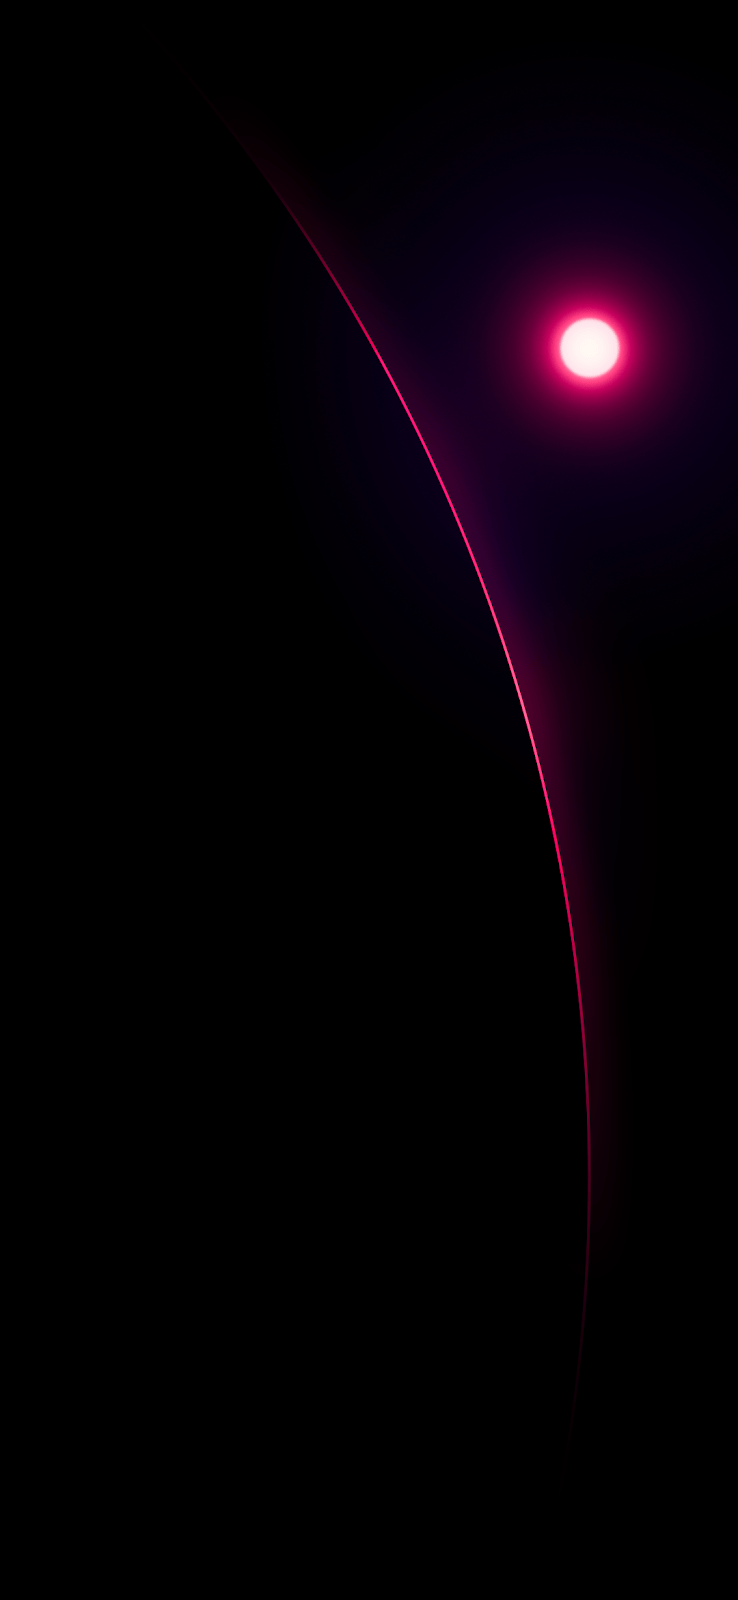 Featured image of post Iphone Xr Black Planet Wallpaper iphone 8 7 6s 6 iphone 8 7 6s 6 iphone se 5s 5c 5 iphone 4s 4 3840x2400 3840x2160 3415x3415 2780x2780 2560x1600 2560x1440 2560x1080 2560x1024 2160x3840 2048x1152 1920x1200 1920x1080 1680x1050